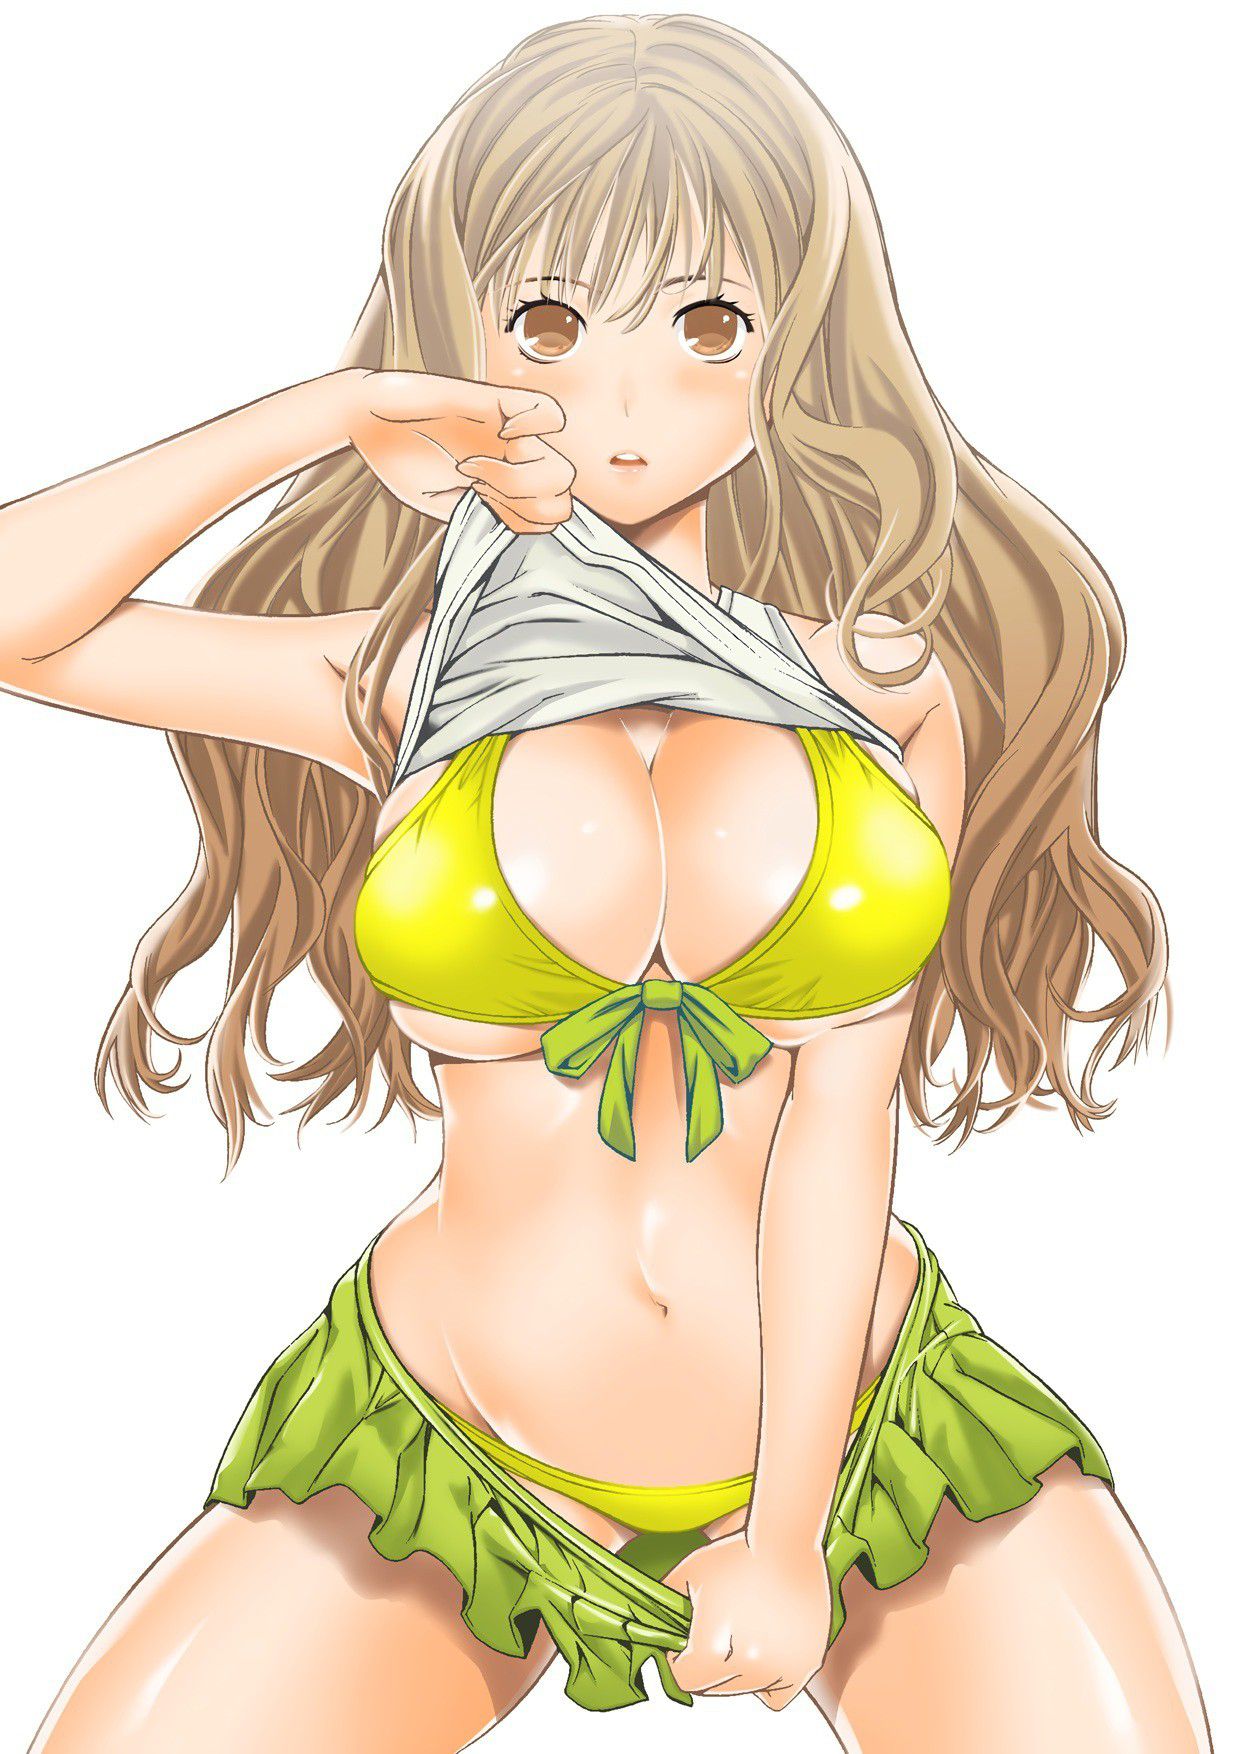 Eggtsu! Eggtsu! Also viewed in the second beautiful girl swimsuit becomes, partially乗ri切rou this hot summer!!! 1